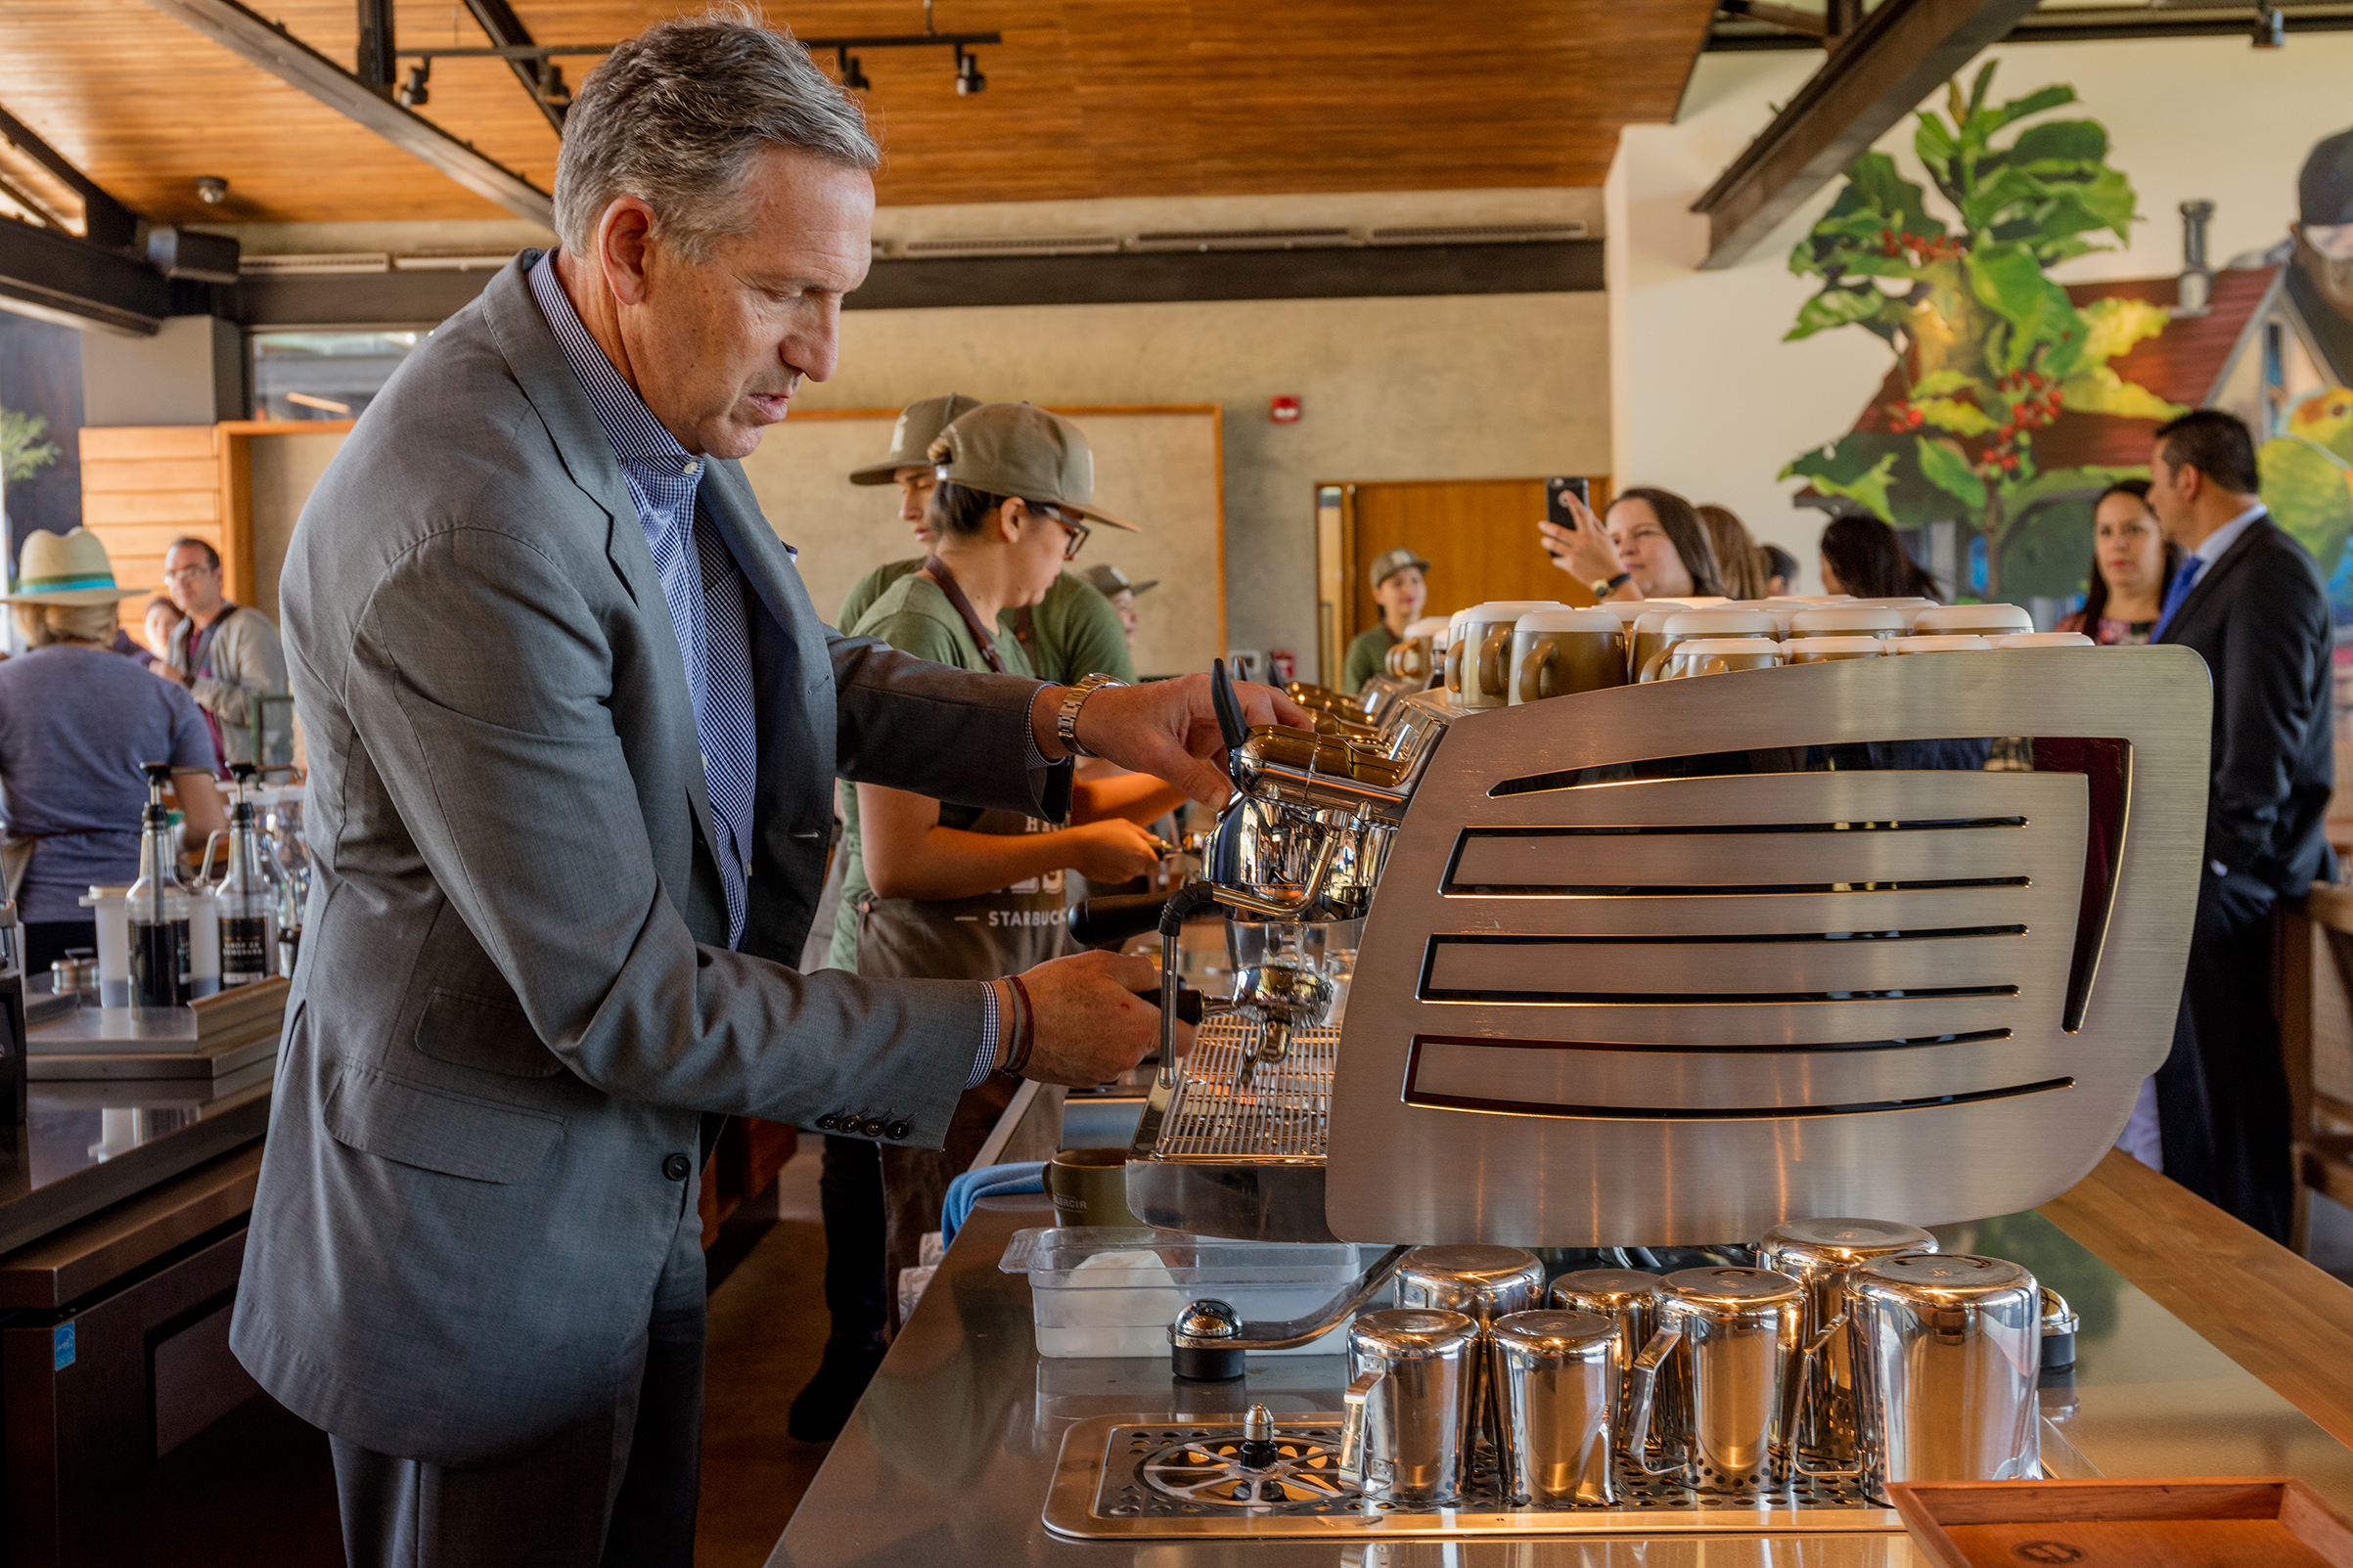 Longtime Starbucks boss Howard Schultz brews a cup of coffee at the company’s Costa Rican coffee farm (George Steinmetz for TIME)